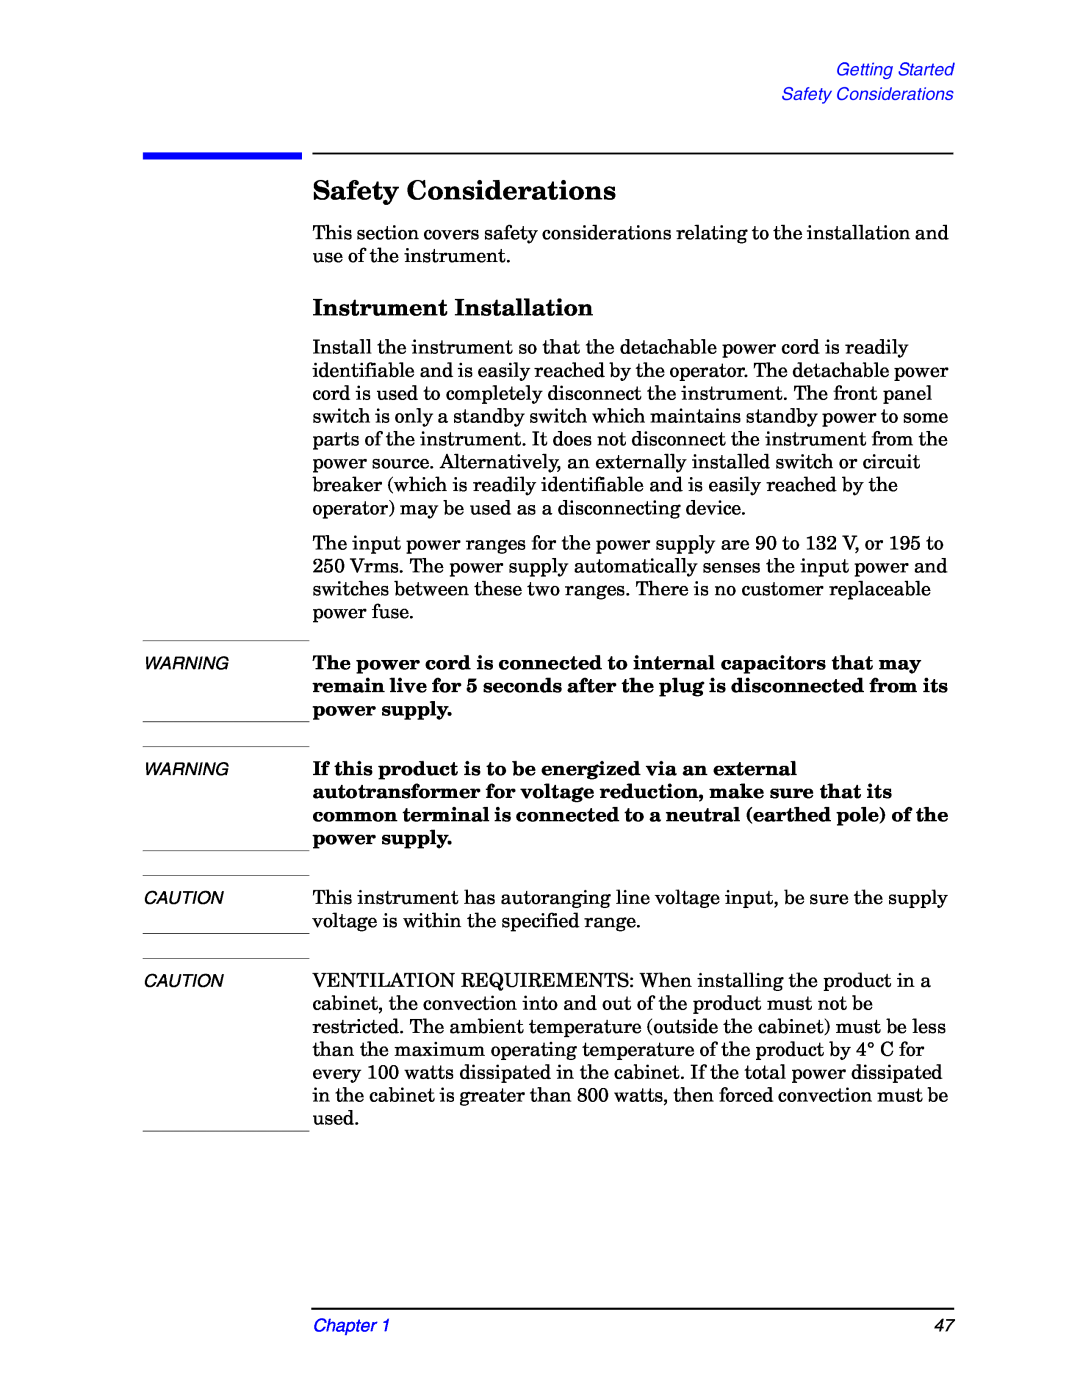 Agilent Technologies E4406A manual Safety Considerations, Instrument Installation 